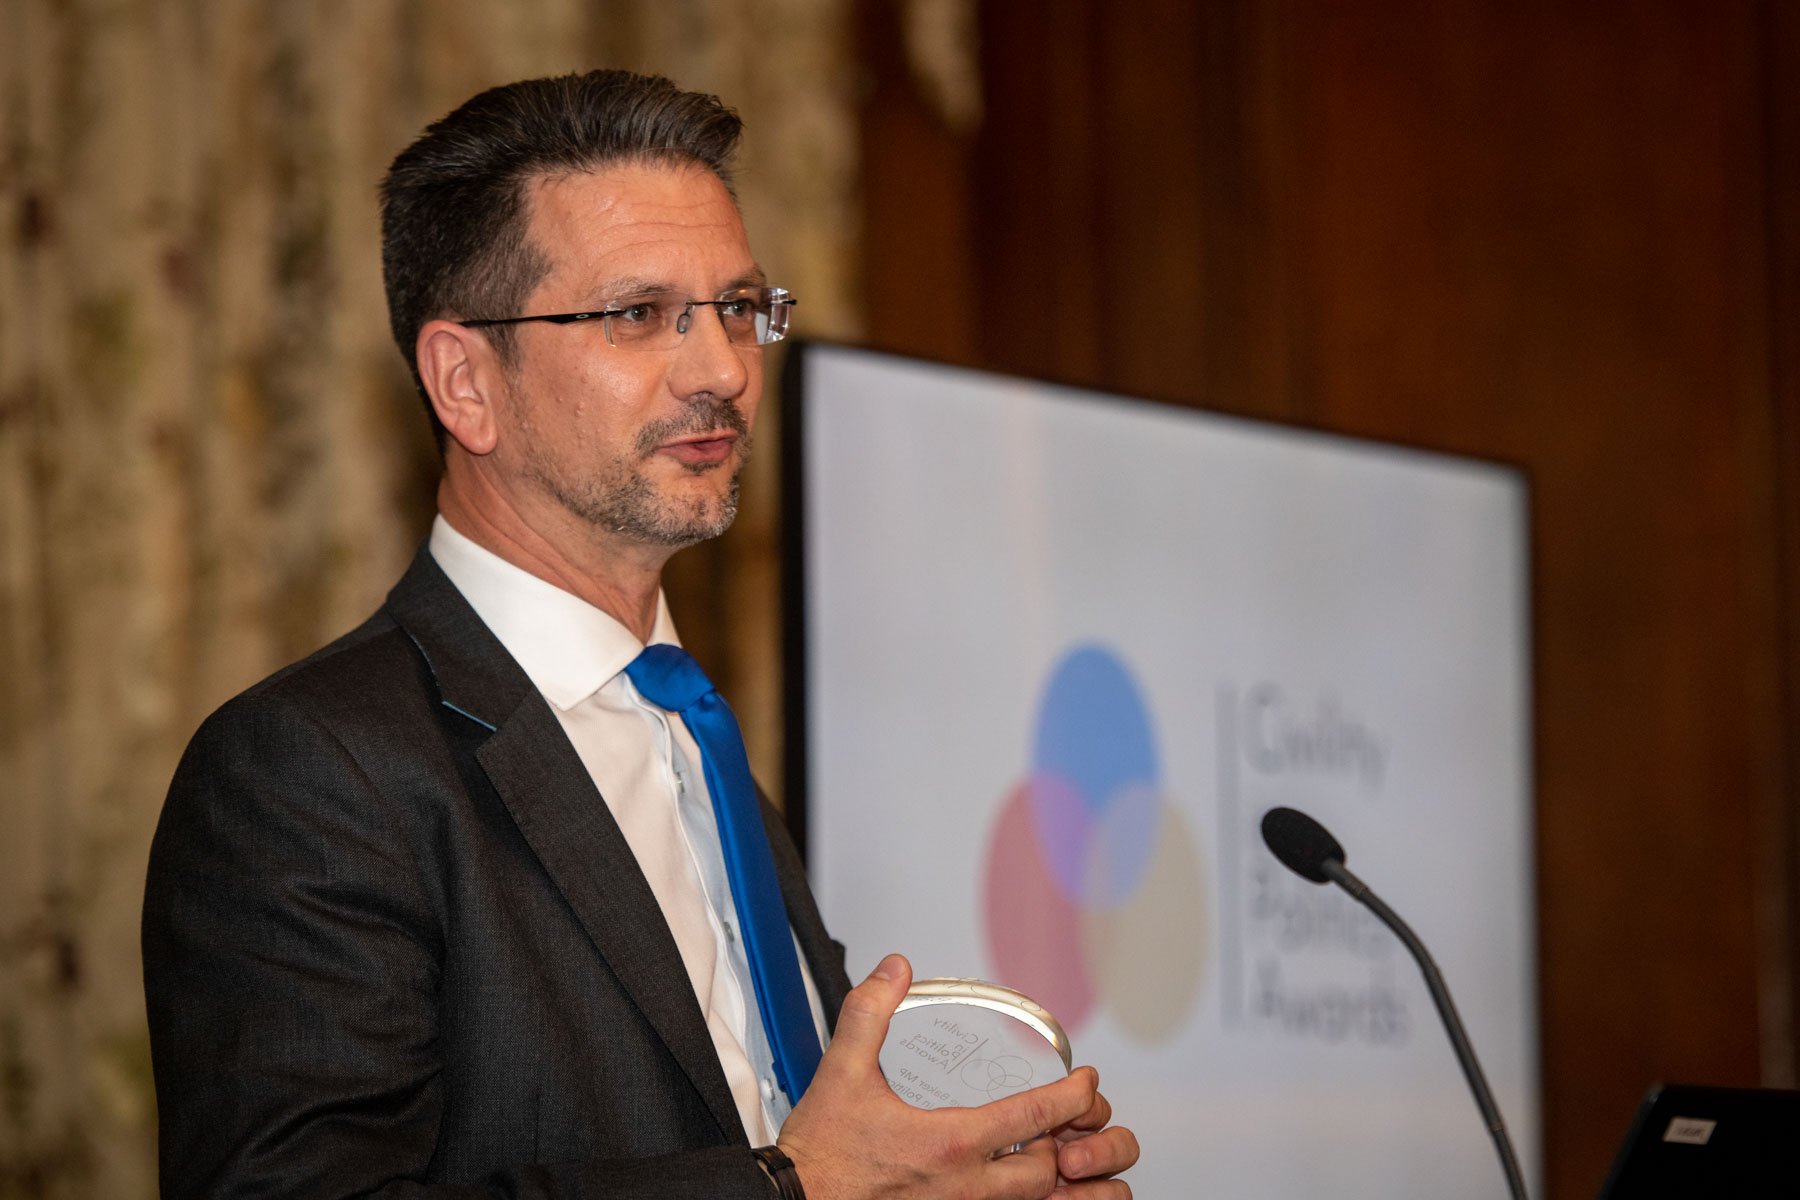 Civility in Politics Politician of the Year 2020 Steve Baker MP